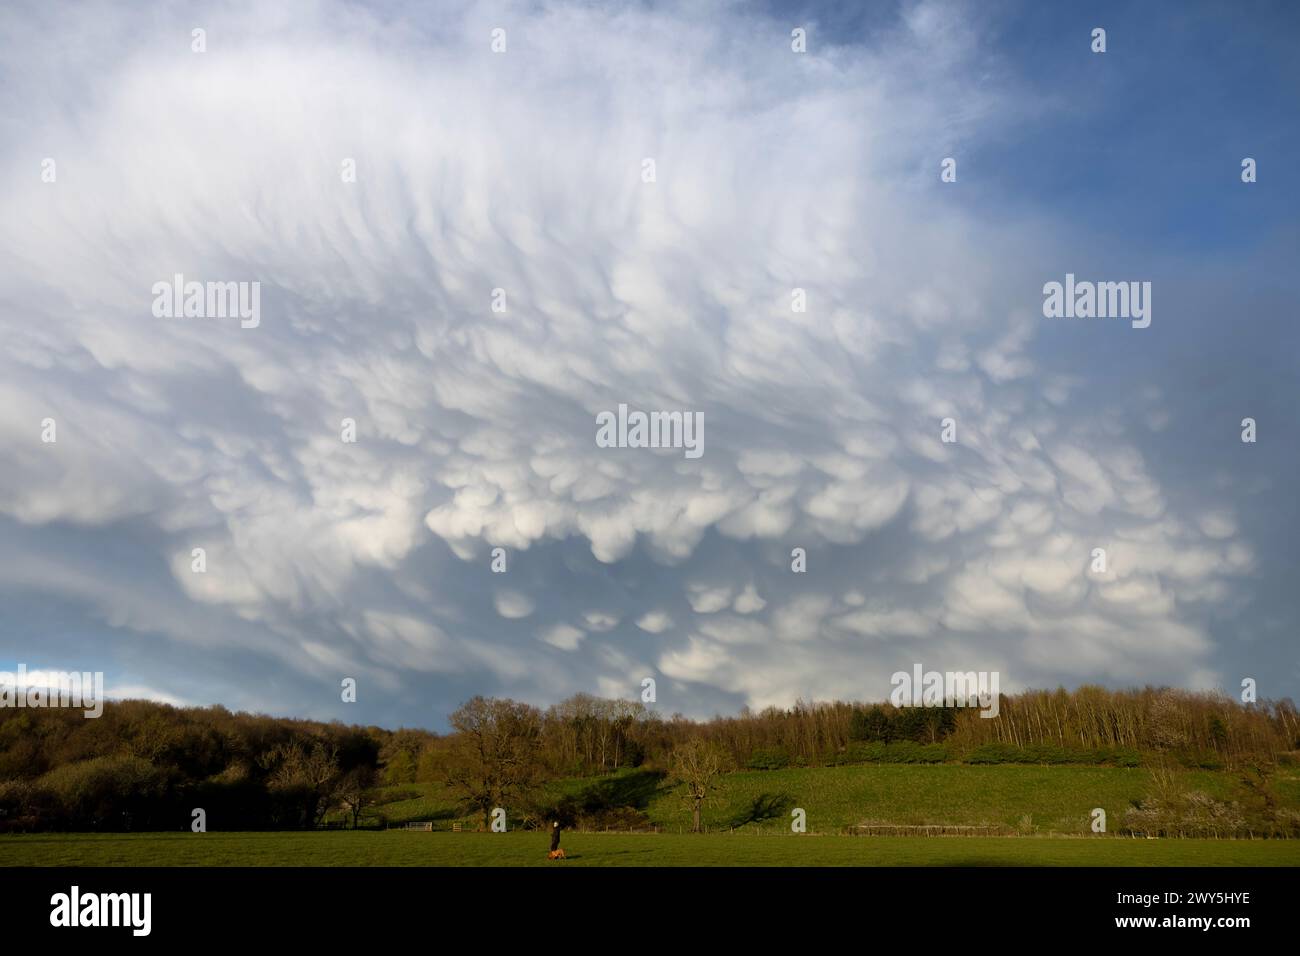 29/03/24  Following heavy rain rare mammatus clouds form over Walton-on-Trent, Derbyshire, UK.   Mammatus clouds are unusual and eye-catching cloud fo Stock Photo